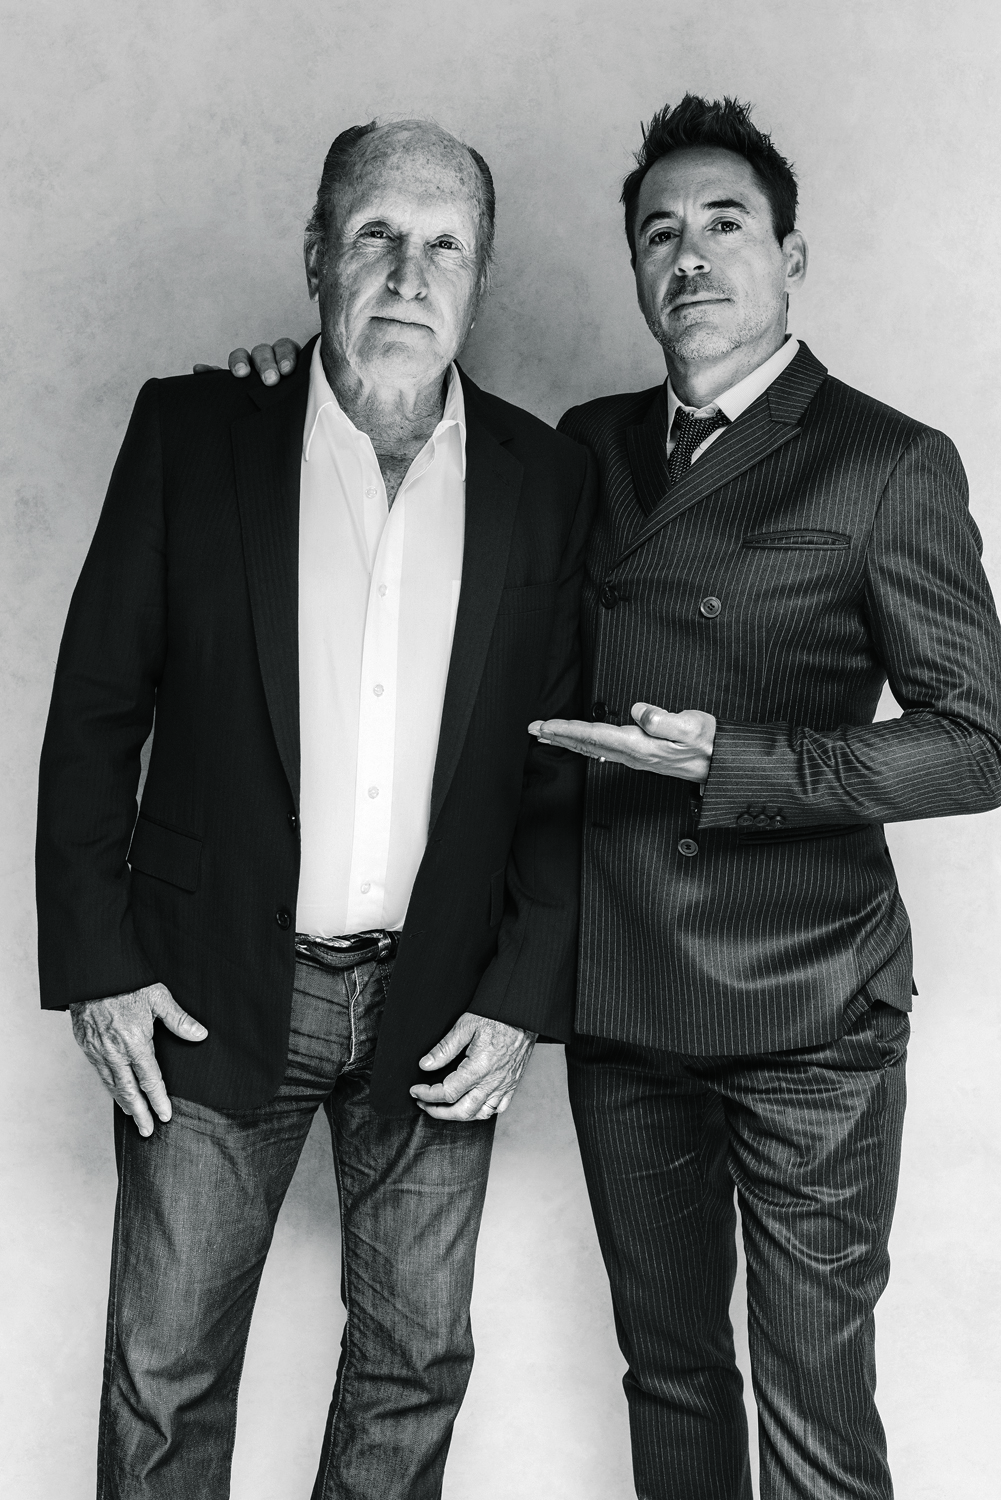 TORONTO, CANADA - SEPTEMBER 04:  Actors Robert Downey Jr. and Robert Duvall are photographed for a  Portrait Session at the 2014 Toronto Film Festival on September 4, 2014 in Toronto, Ontario. (Photo by Jeff Vespa/Contour by Getty Images) (Jeff Vespa—Contour by Getty Images)